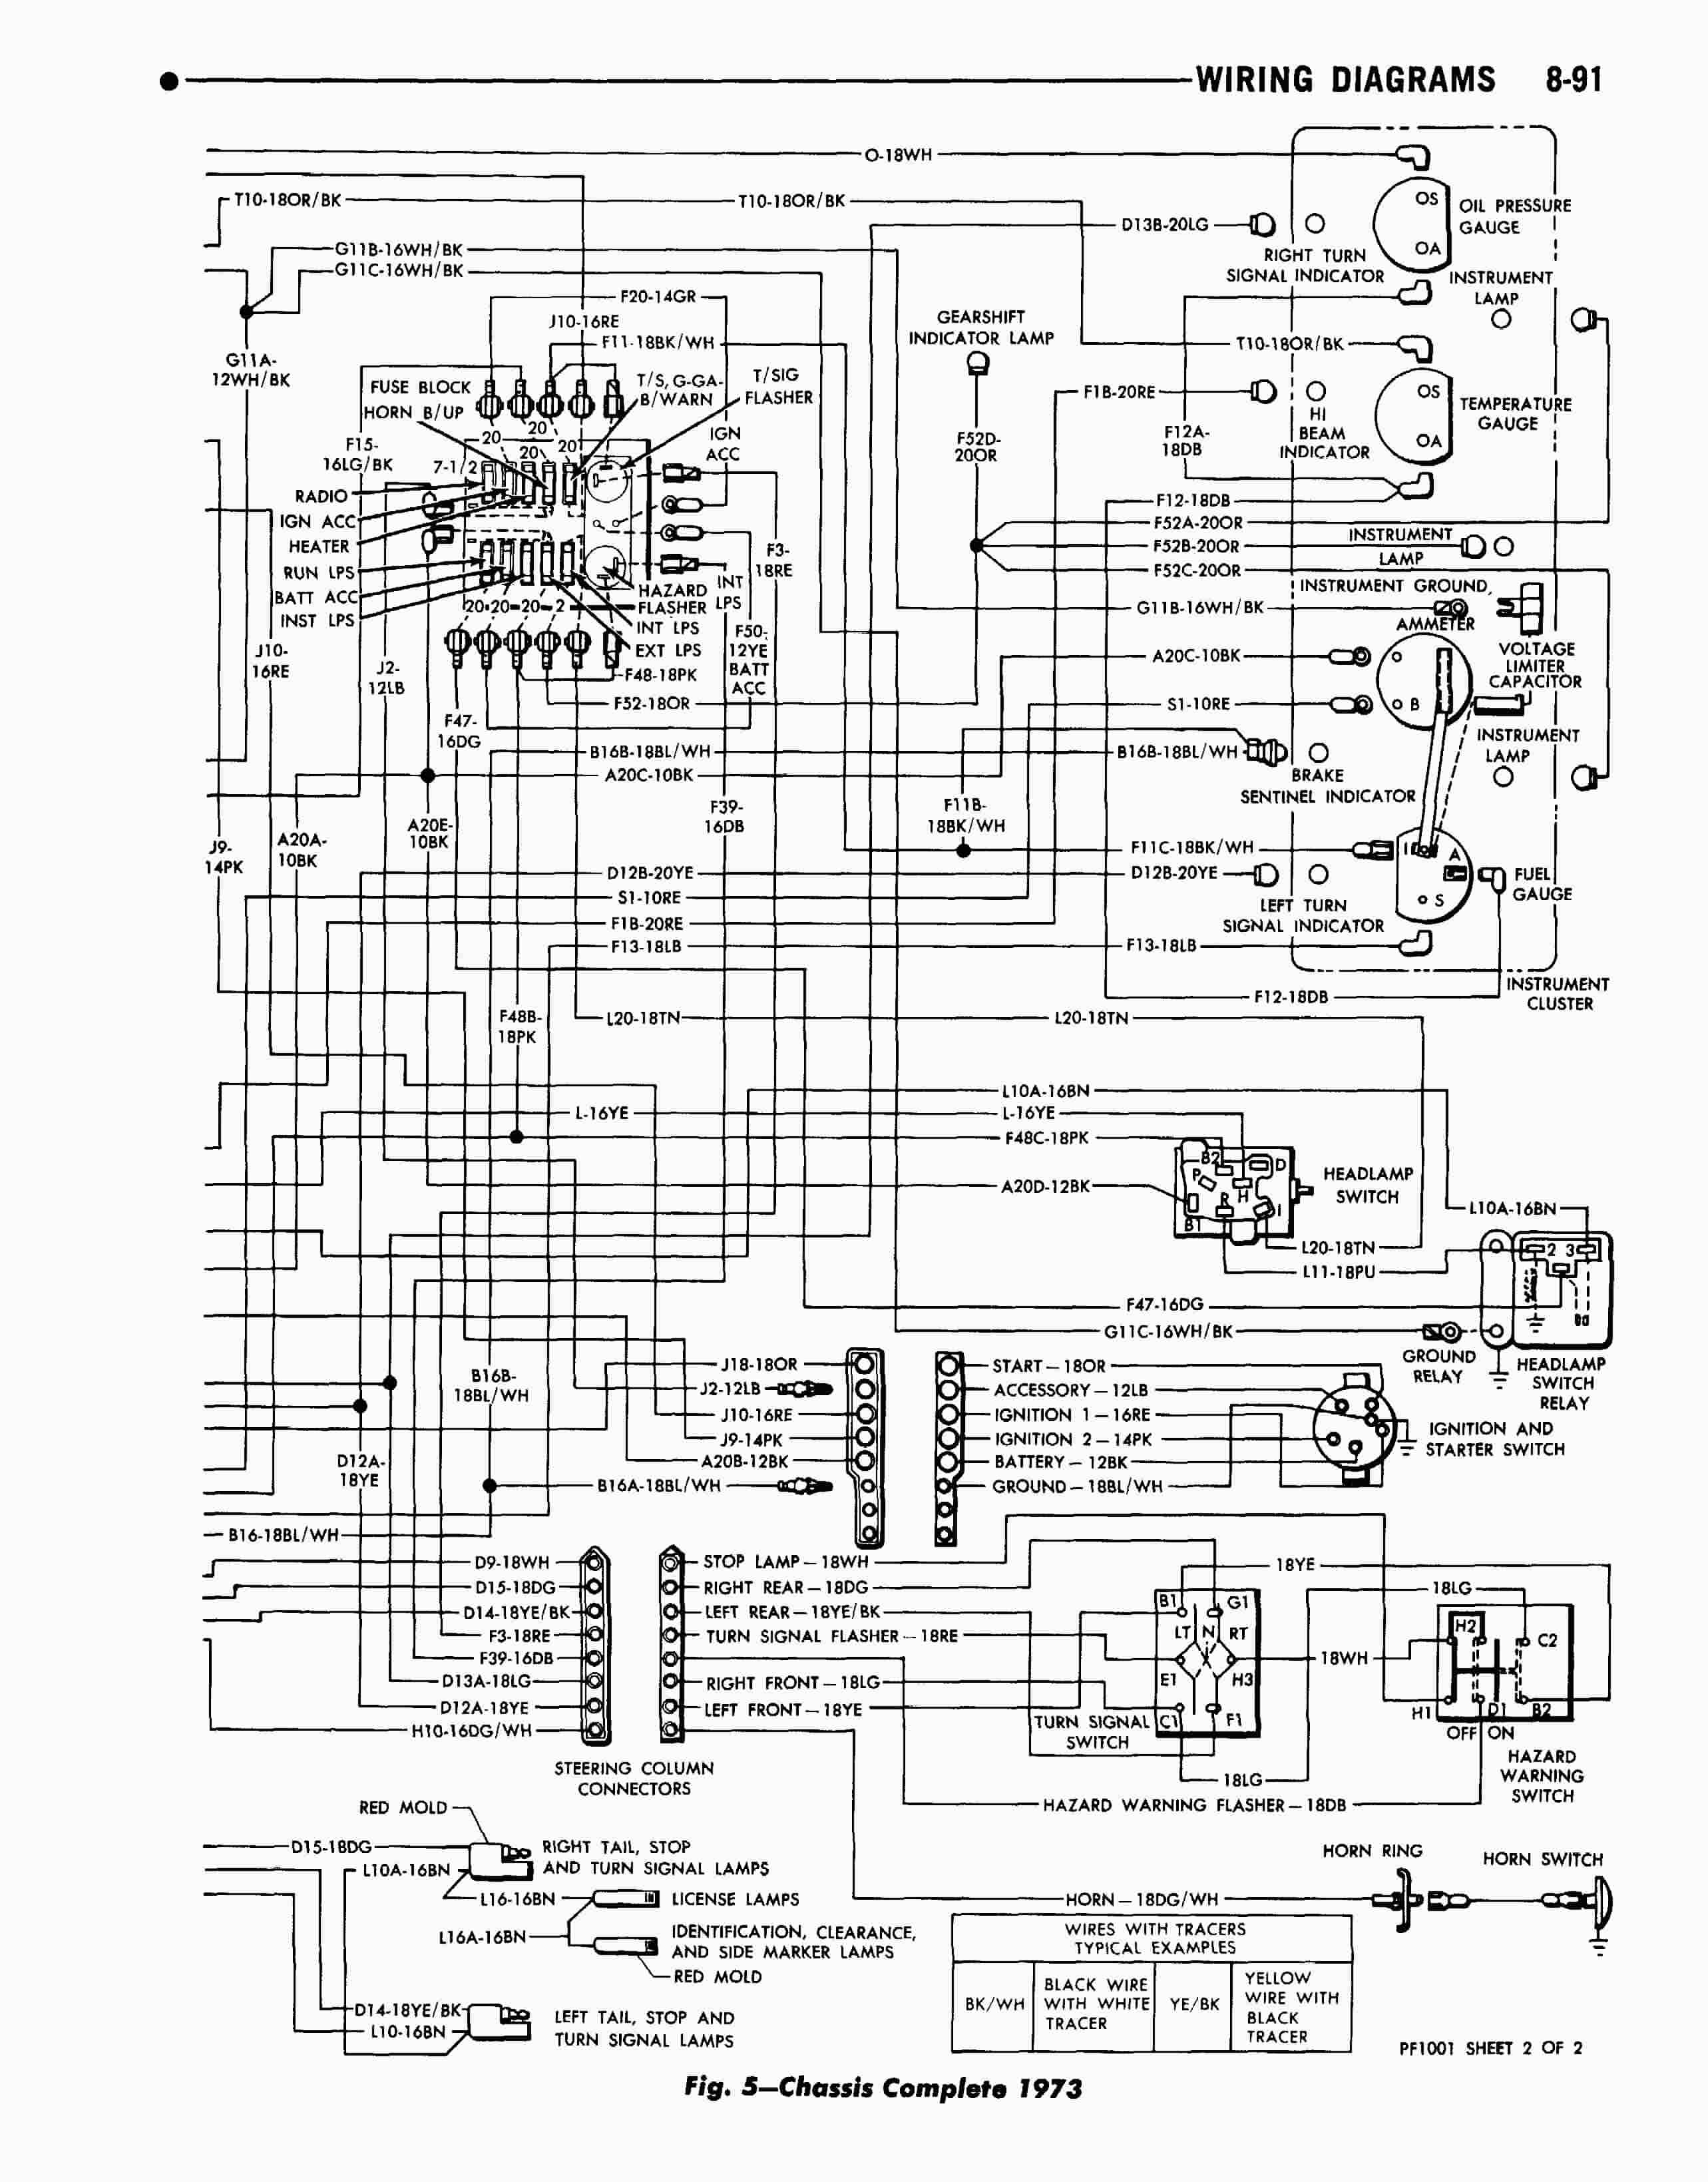 Diagram In Pictures Database Apollo Motorhome Electrical Wiring Diagrams Just Download Or Read Wiring Diagrams 11 39 Forum Onyxum Com